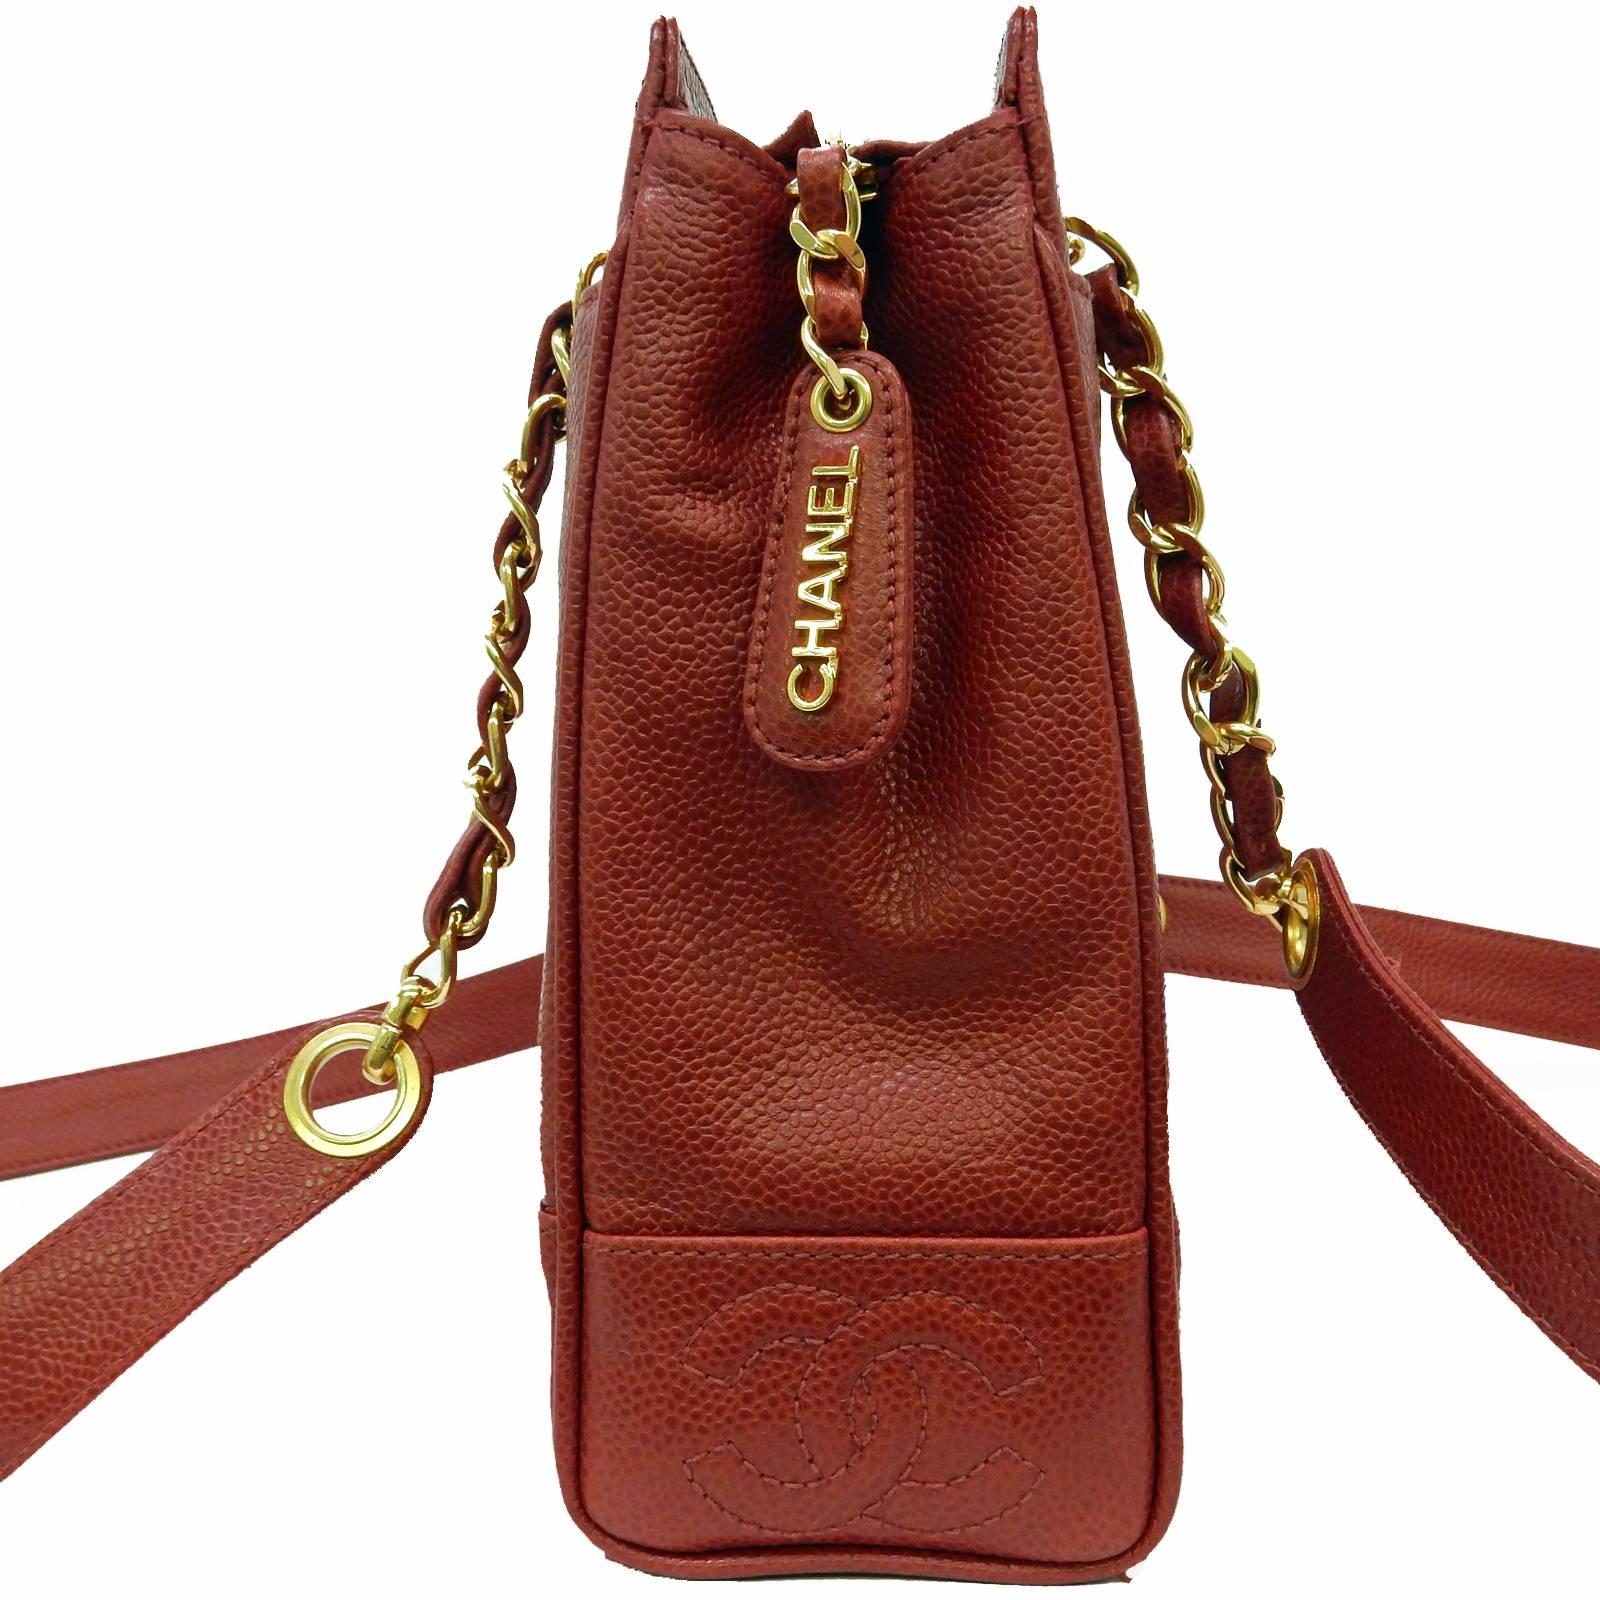 Chanel Red Caviar Leather 